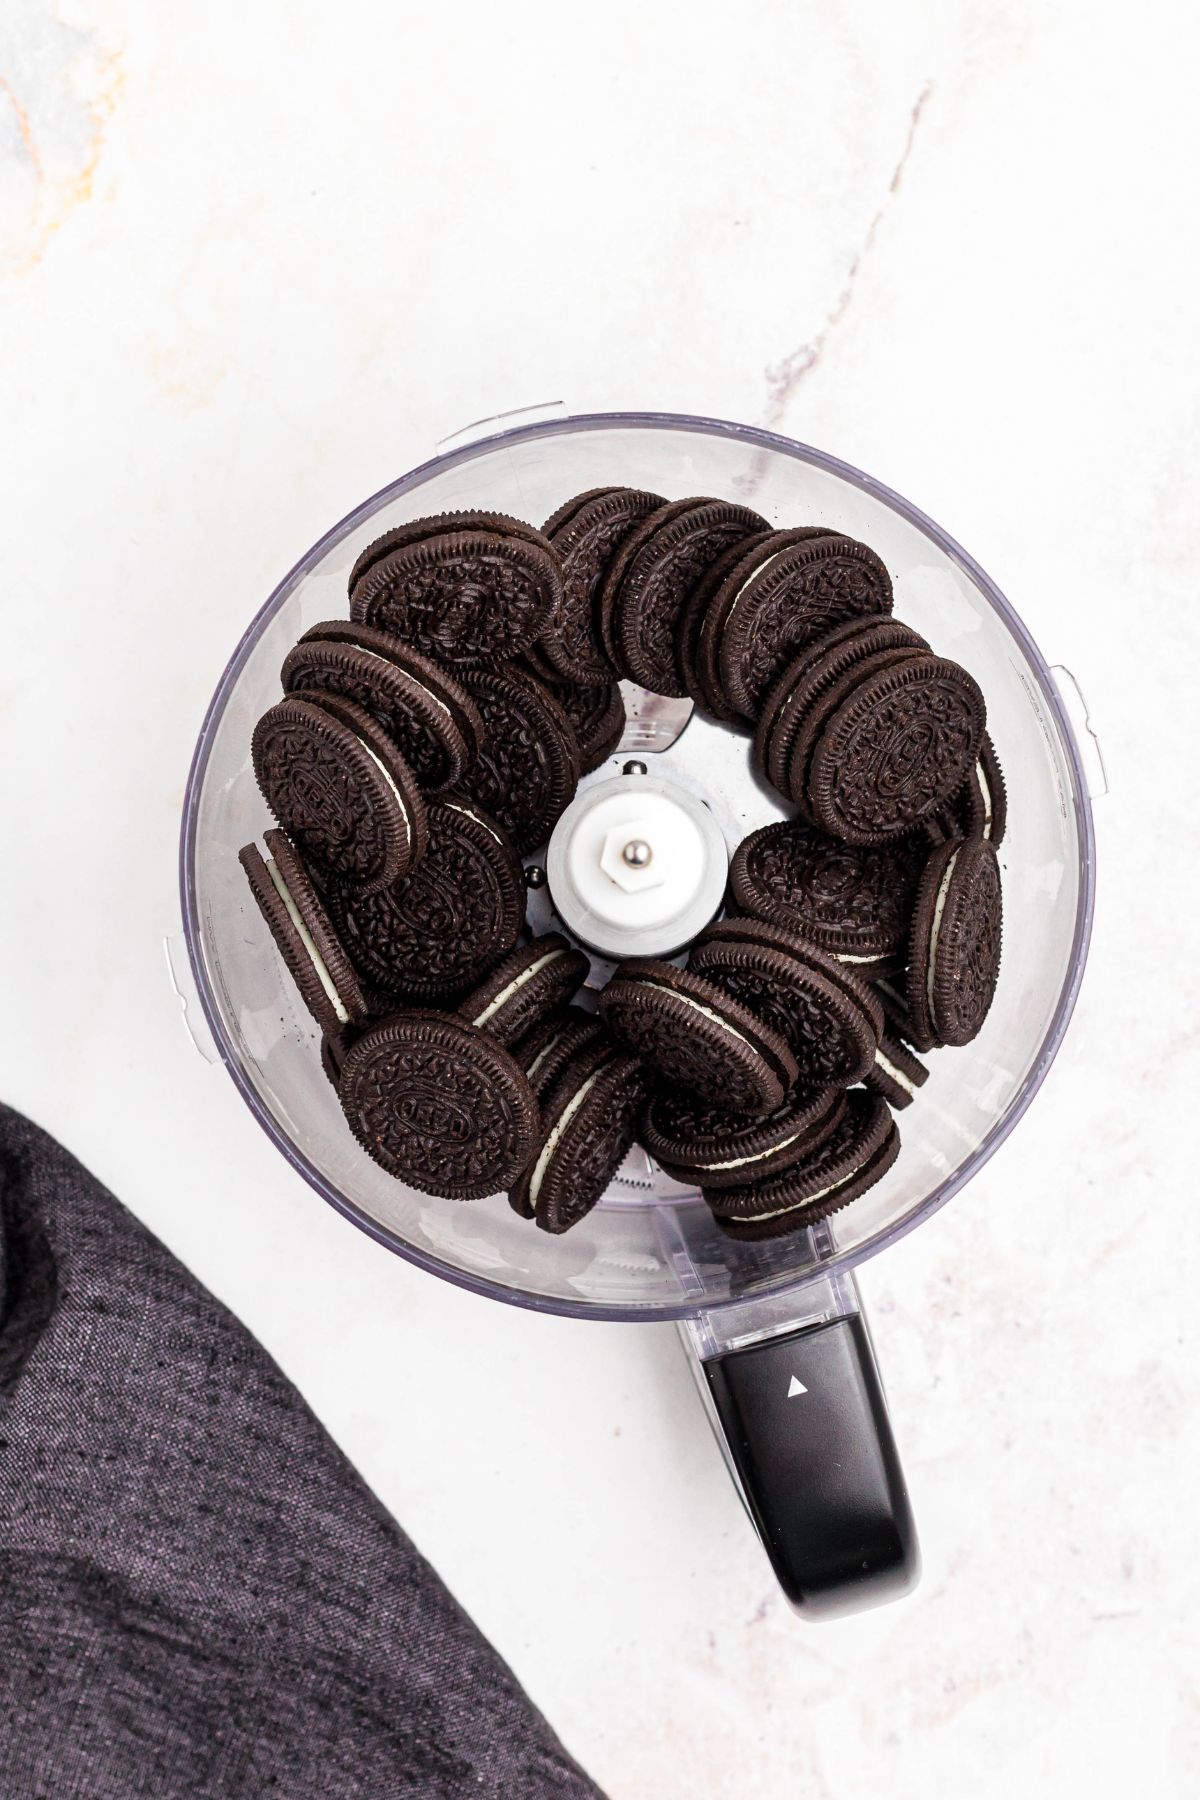 Oreo cookies in a food processor before being chopped.